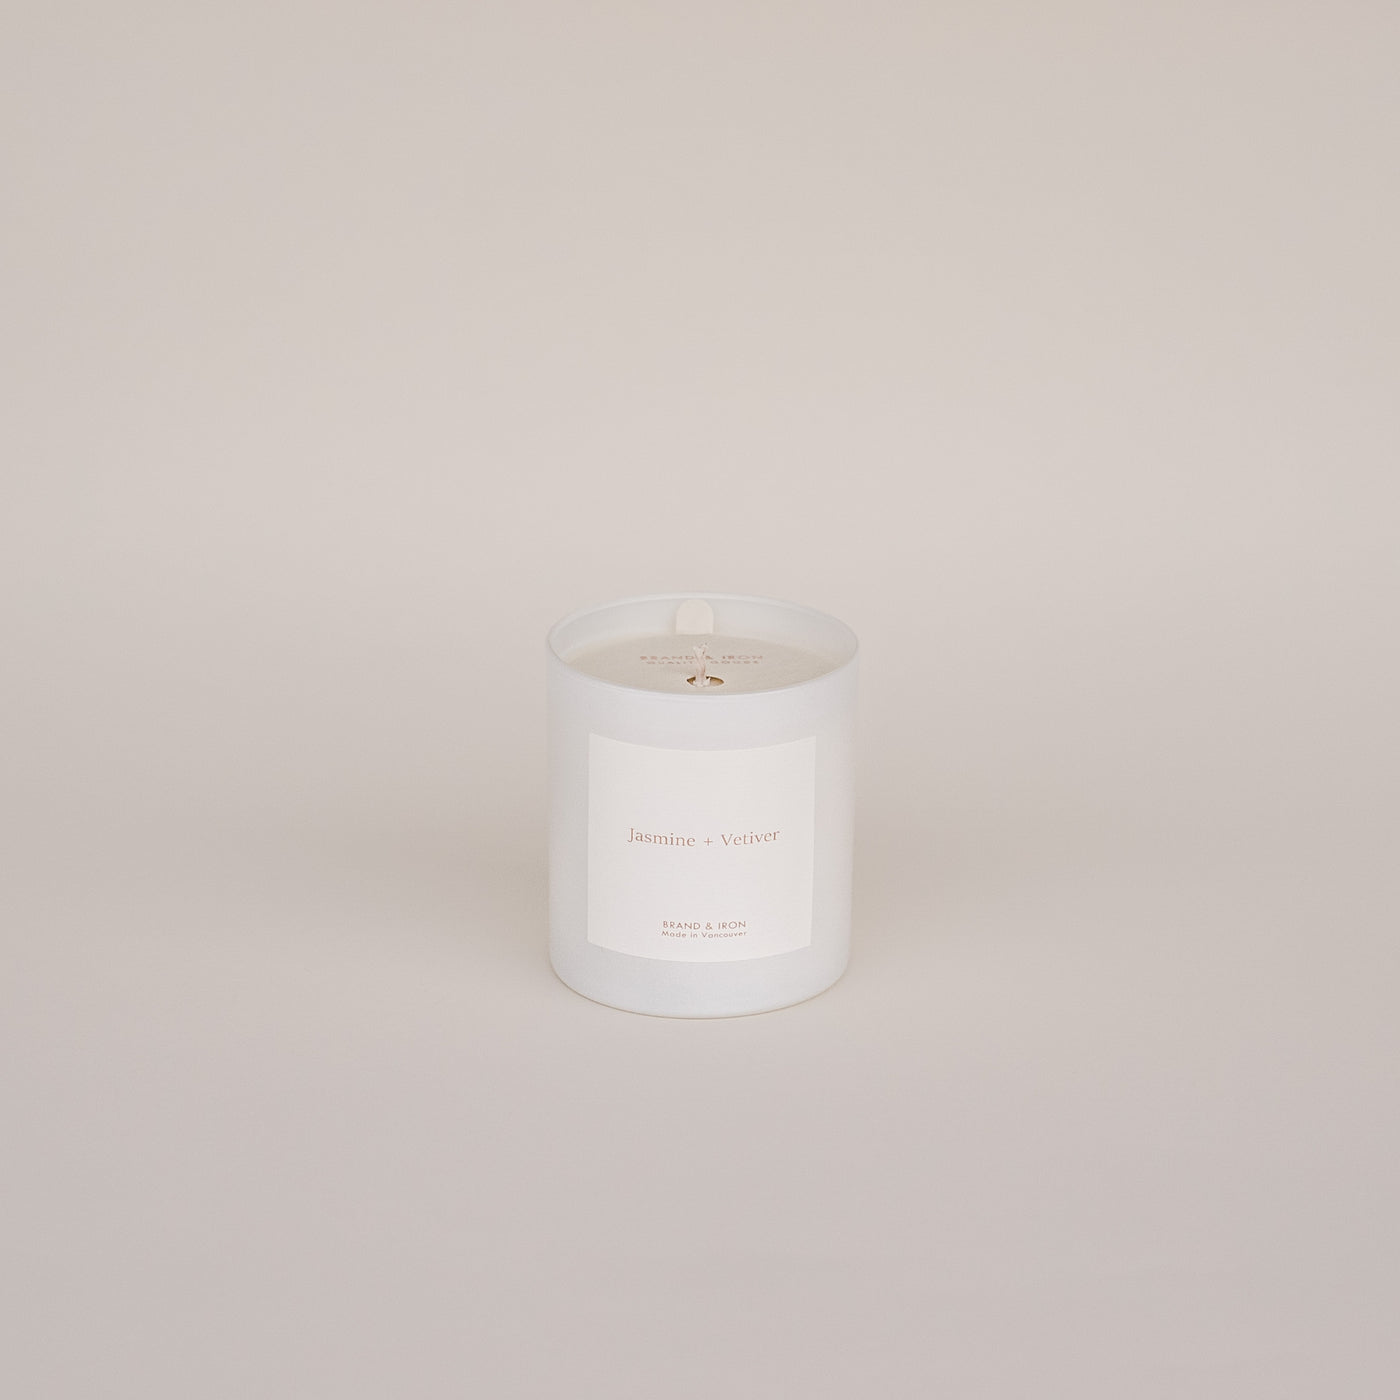 The Jasmine and Vetiver candle by Brand & Iron pictured against a white background. 